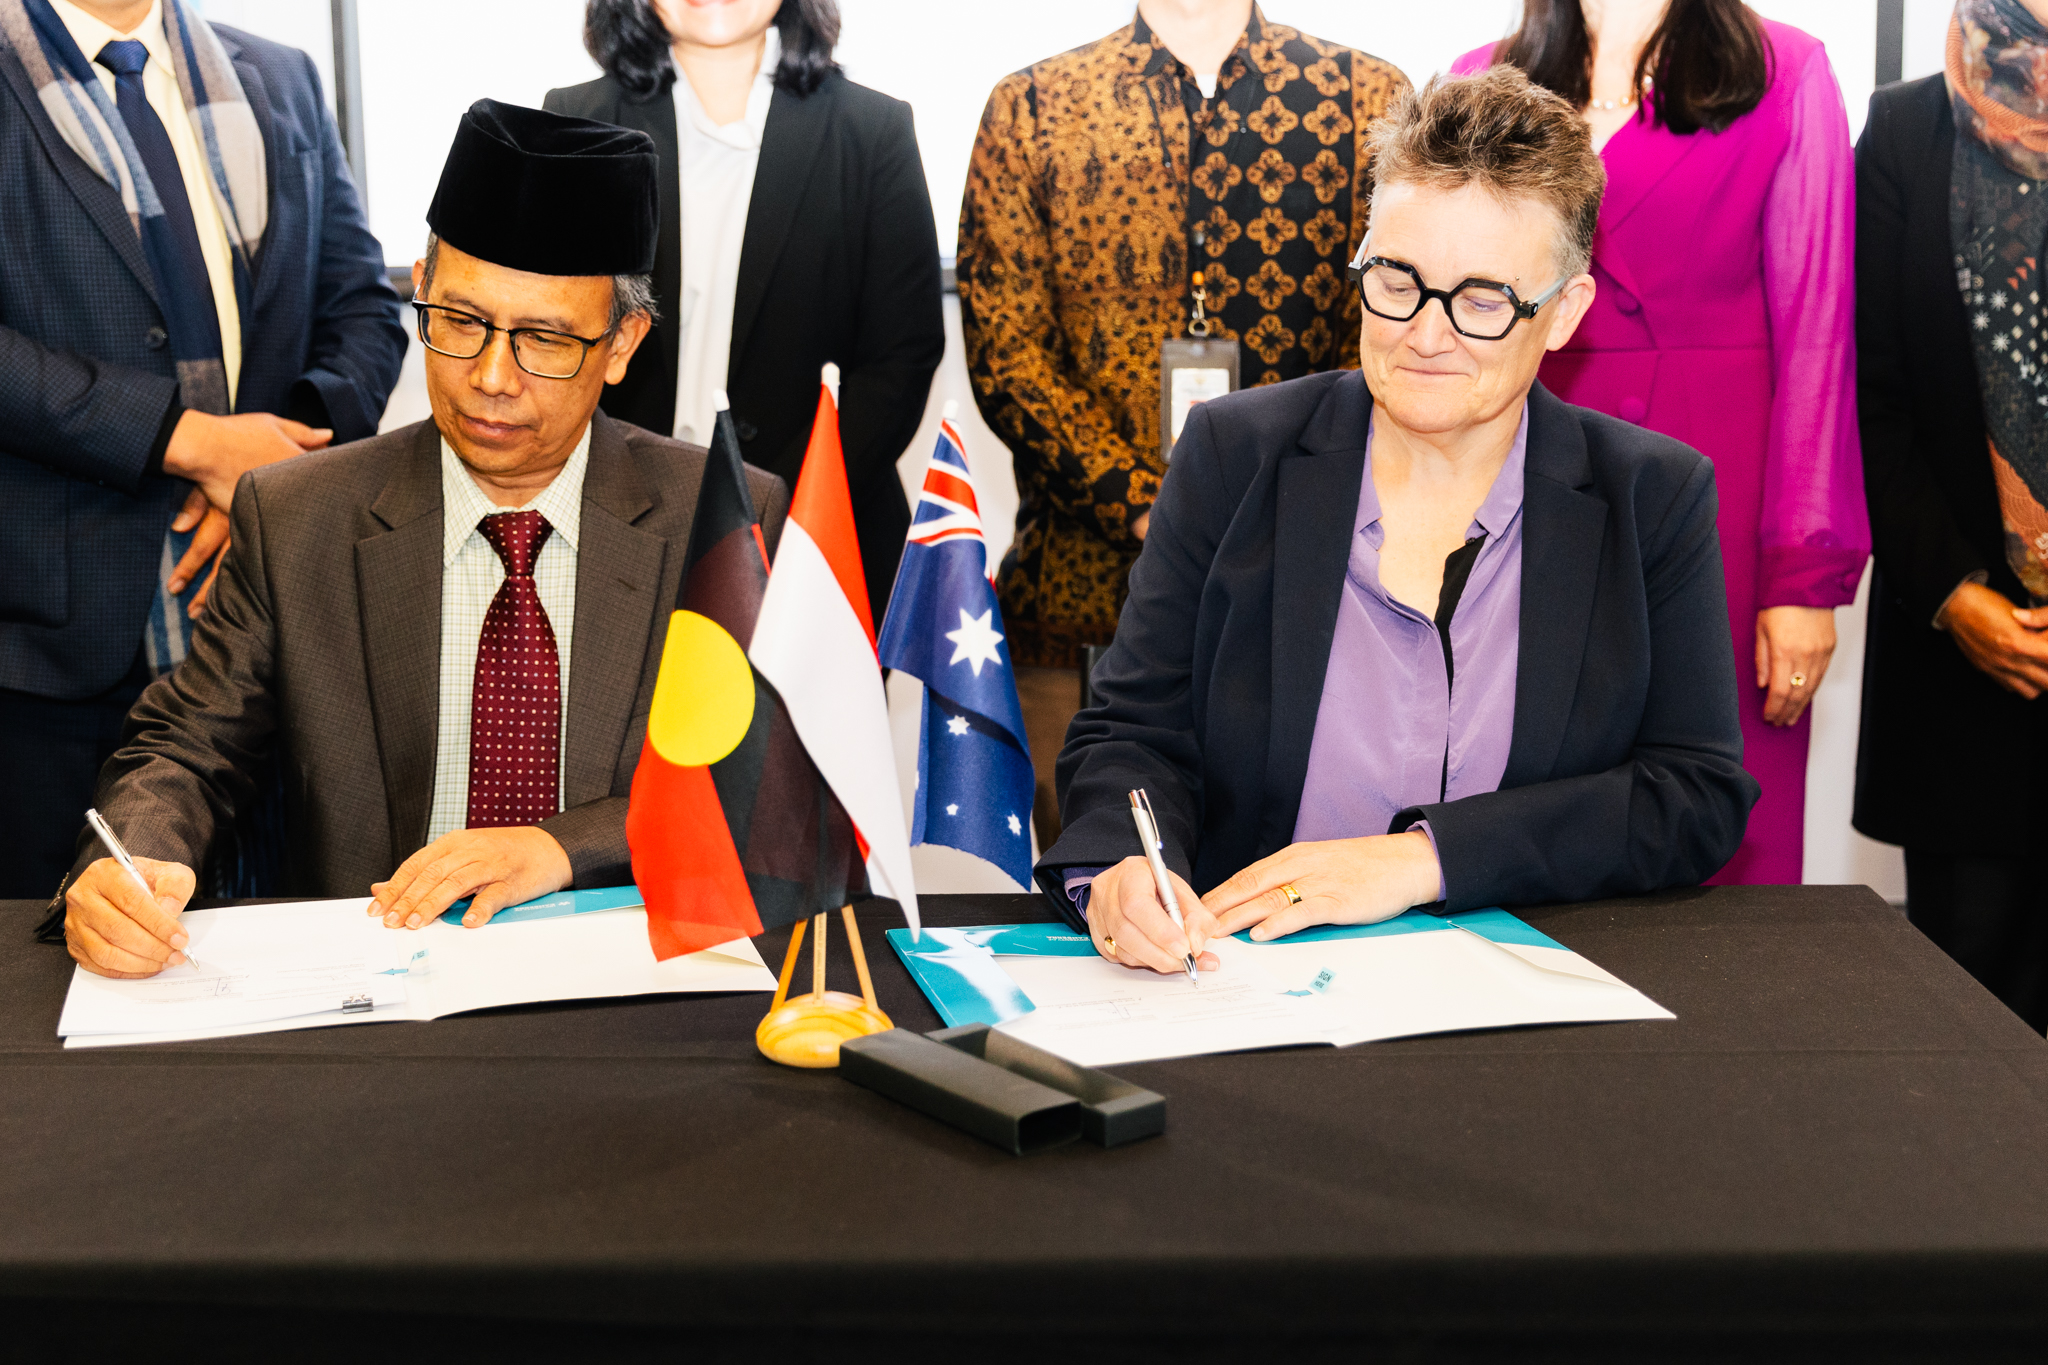 Man and woman sign official documents